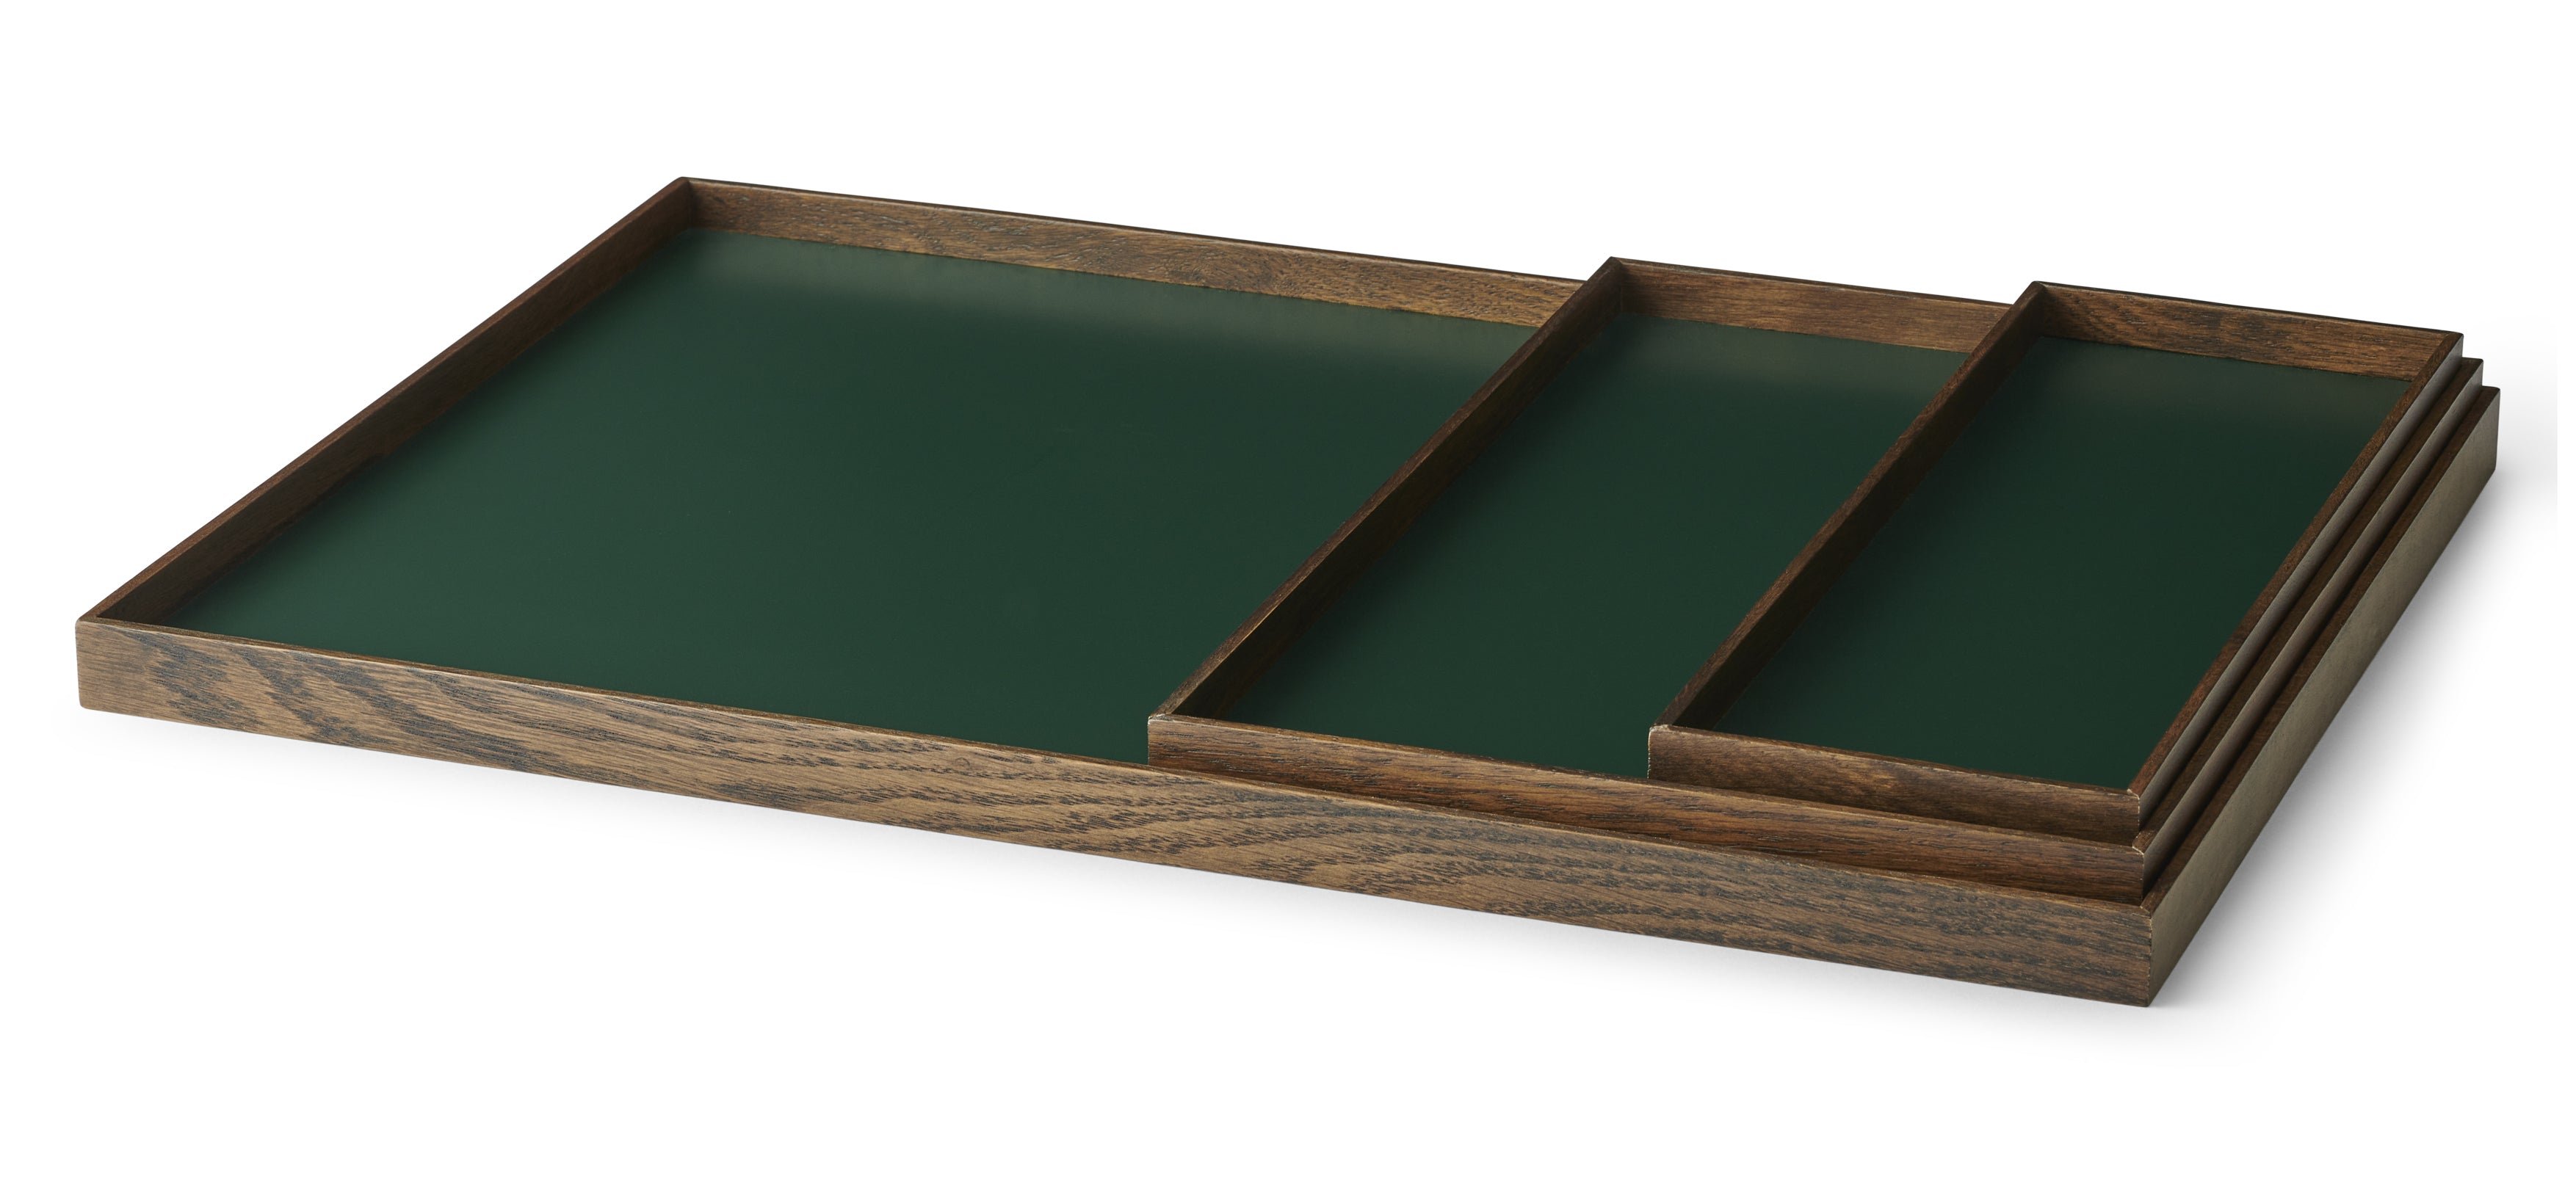 Gejst Frame Tray Smoked Oak/Green, Small